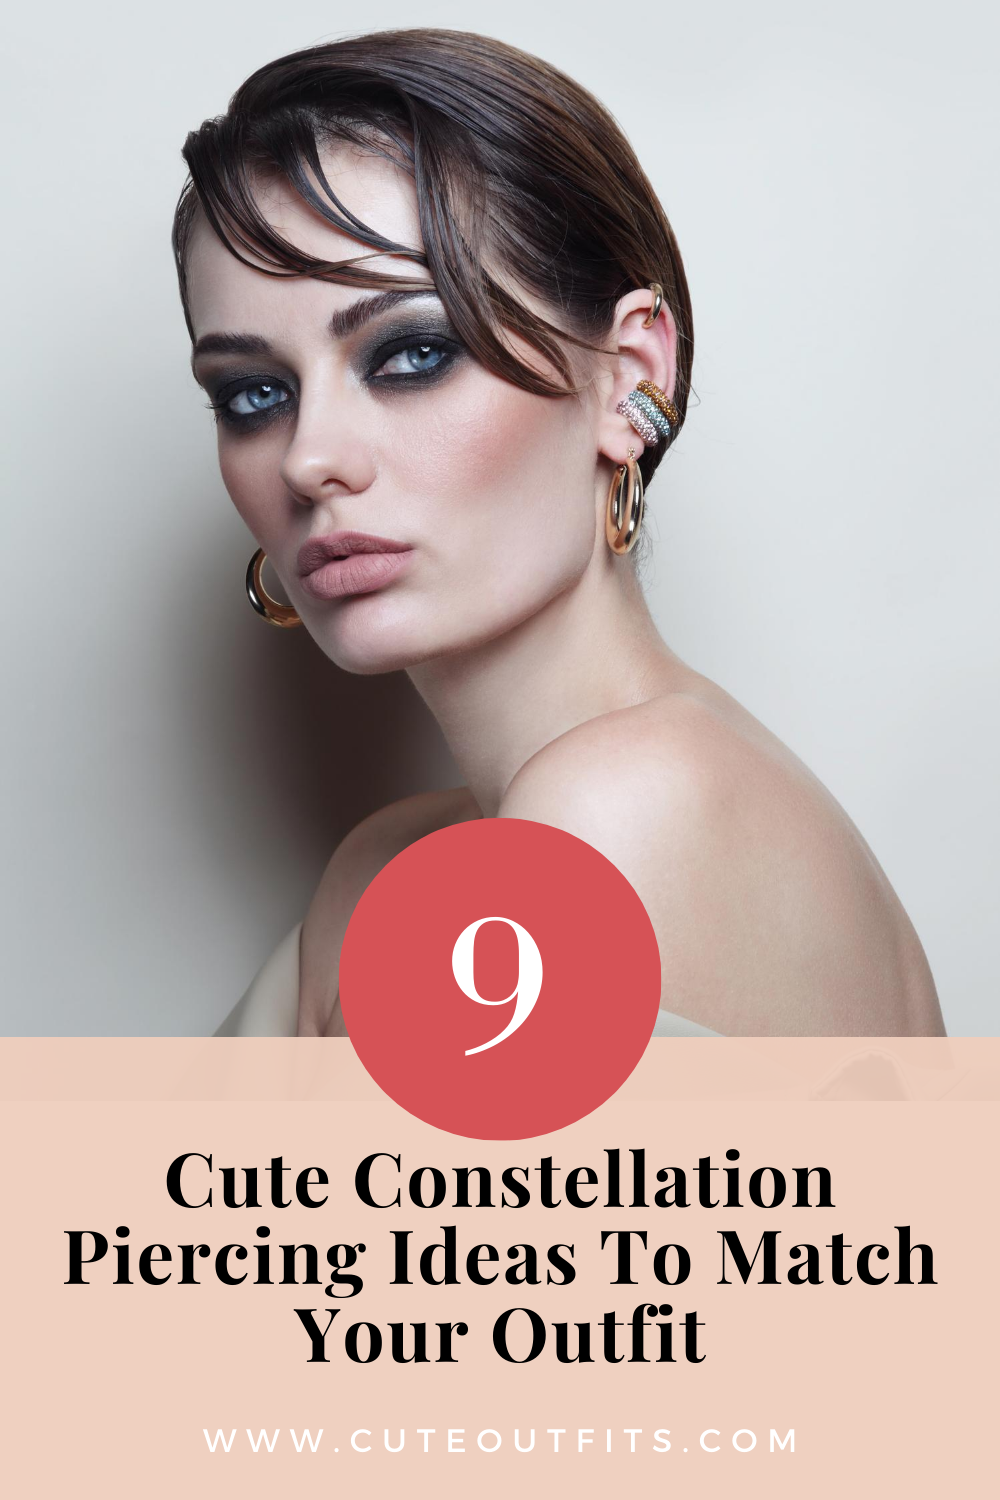 placard | 9 Cute Constellation Piercing Ideas To Match Your Outfit